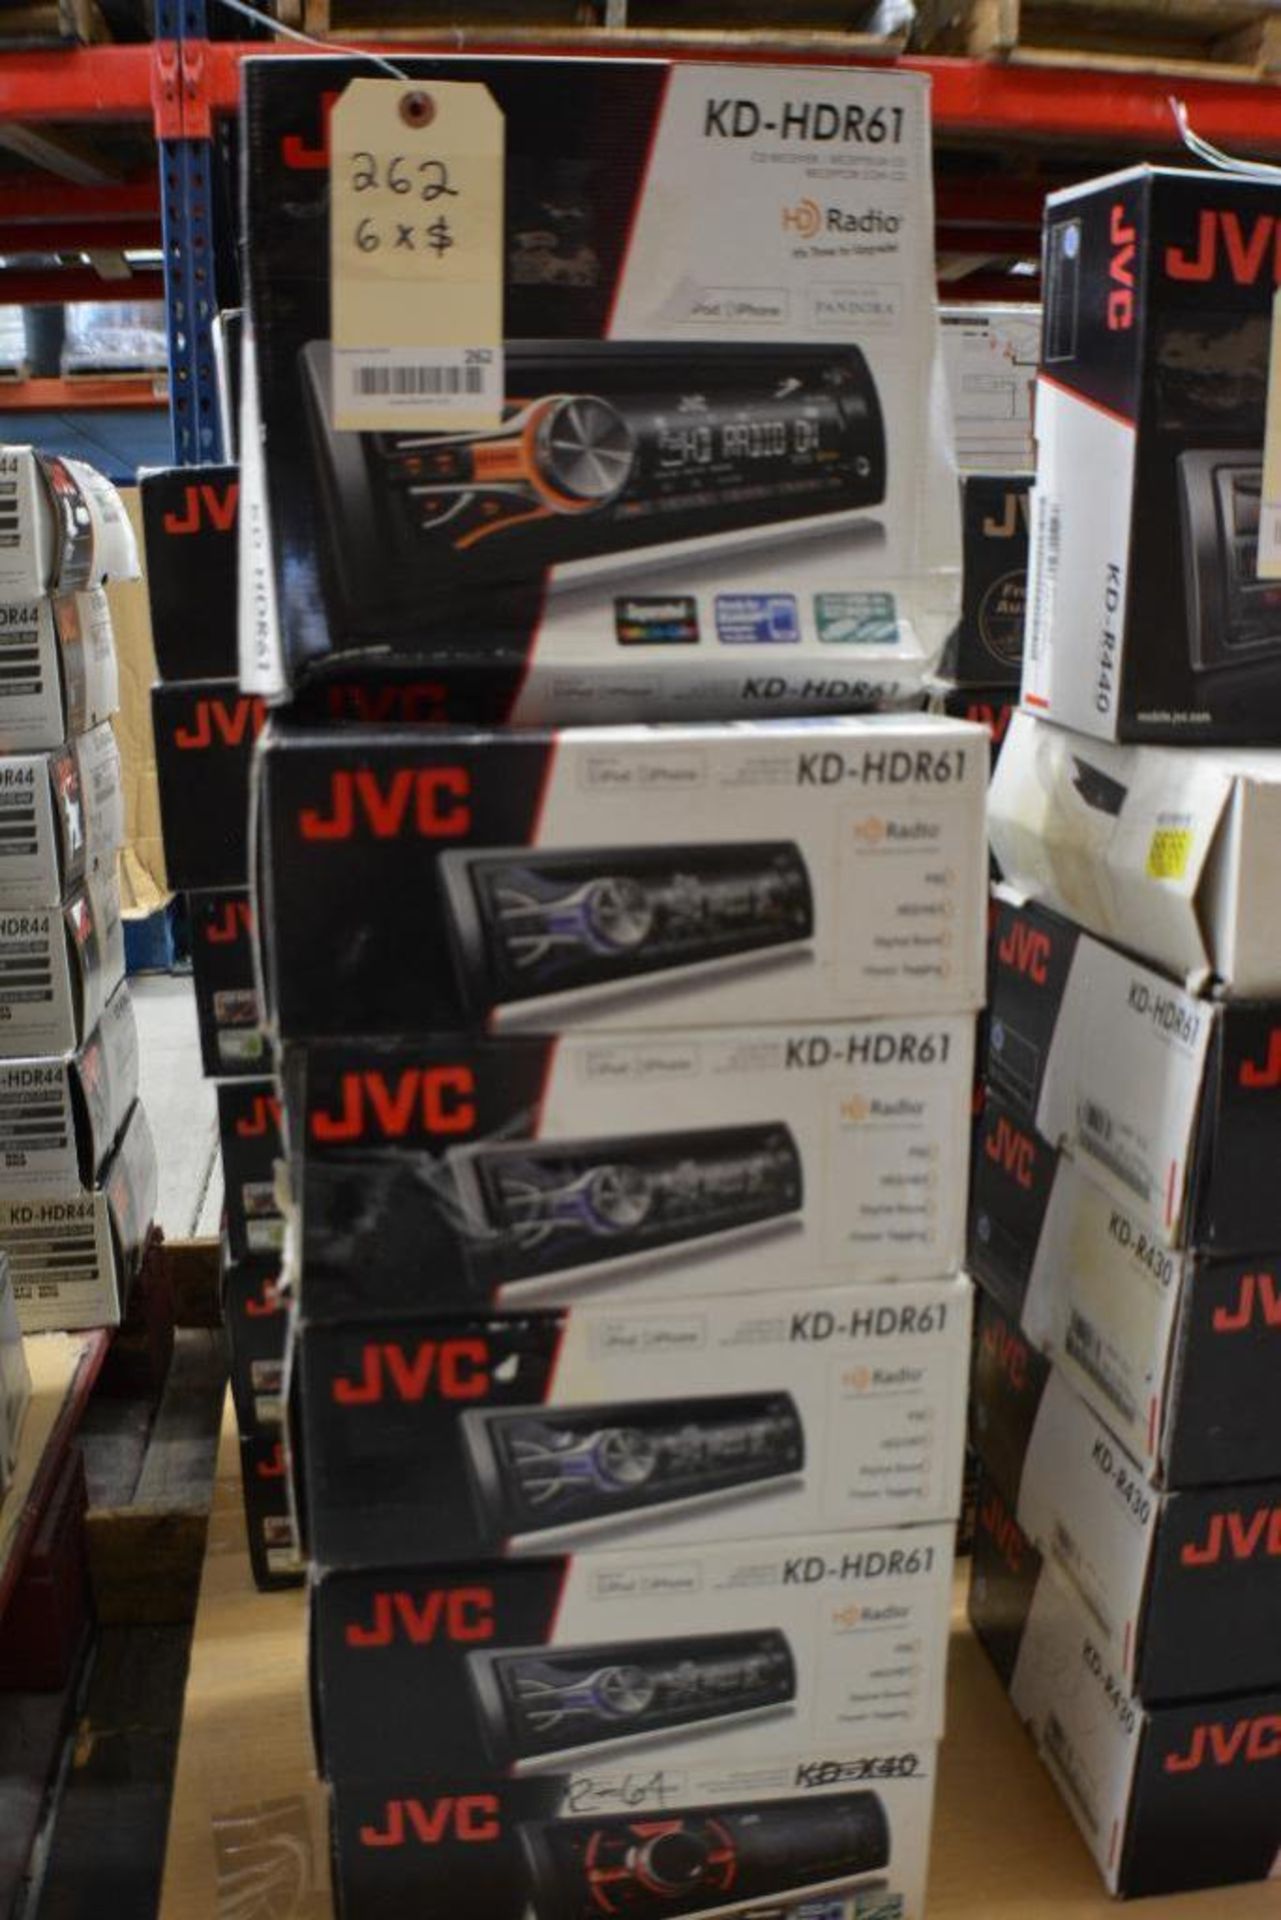 JVC Car Stereo Model HDR-61 Single DIN HD Radio/ Made for iPhone/iPod + Ready for Bluetooth + USB/Au